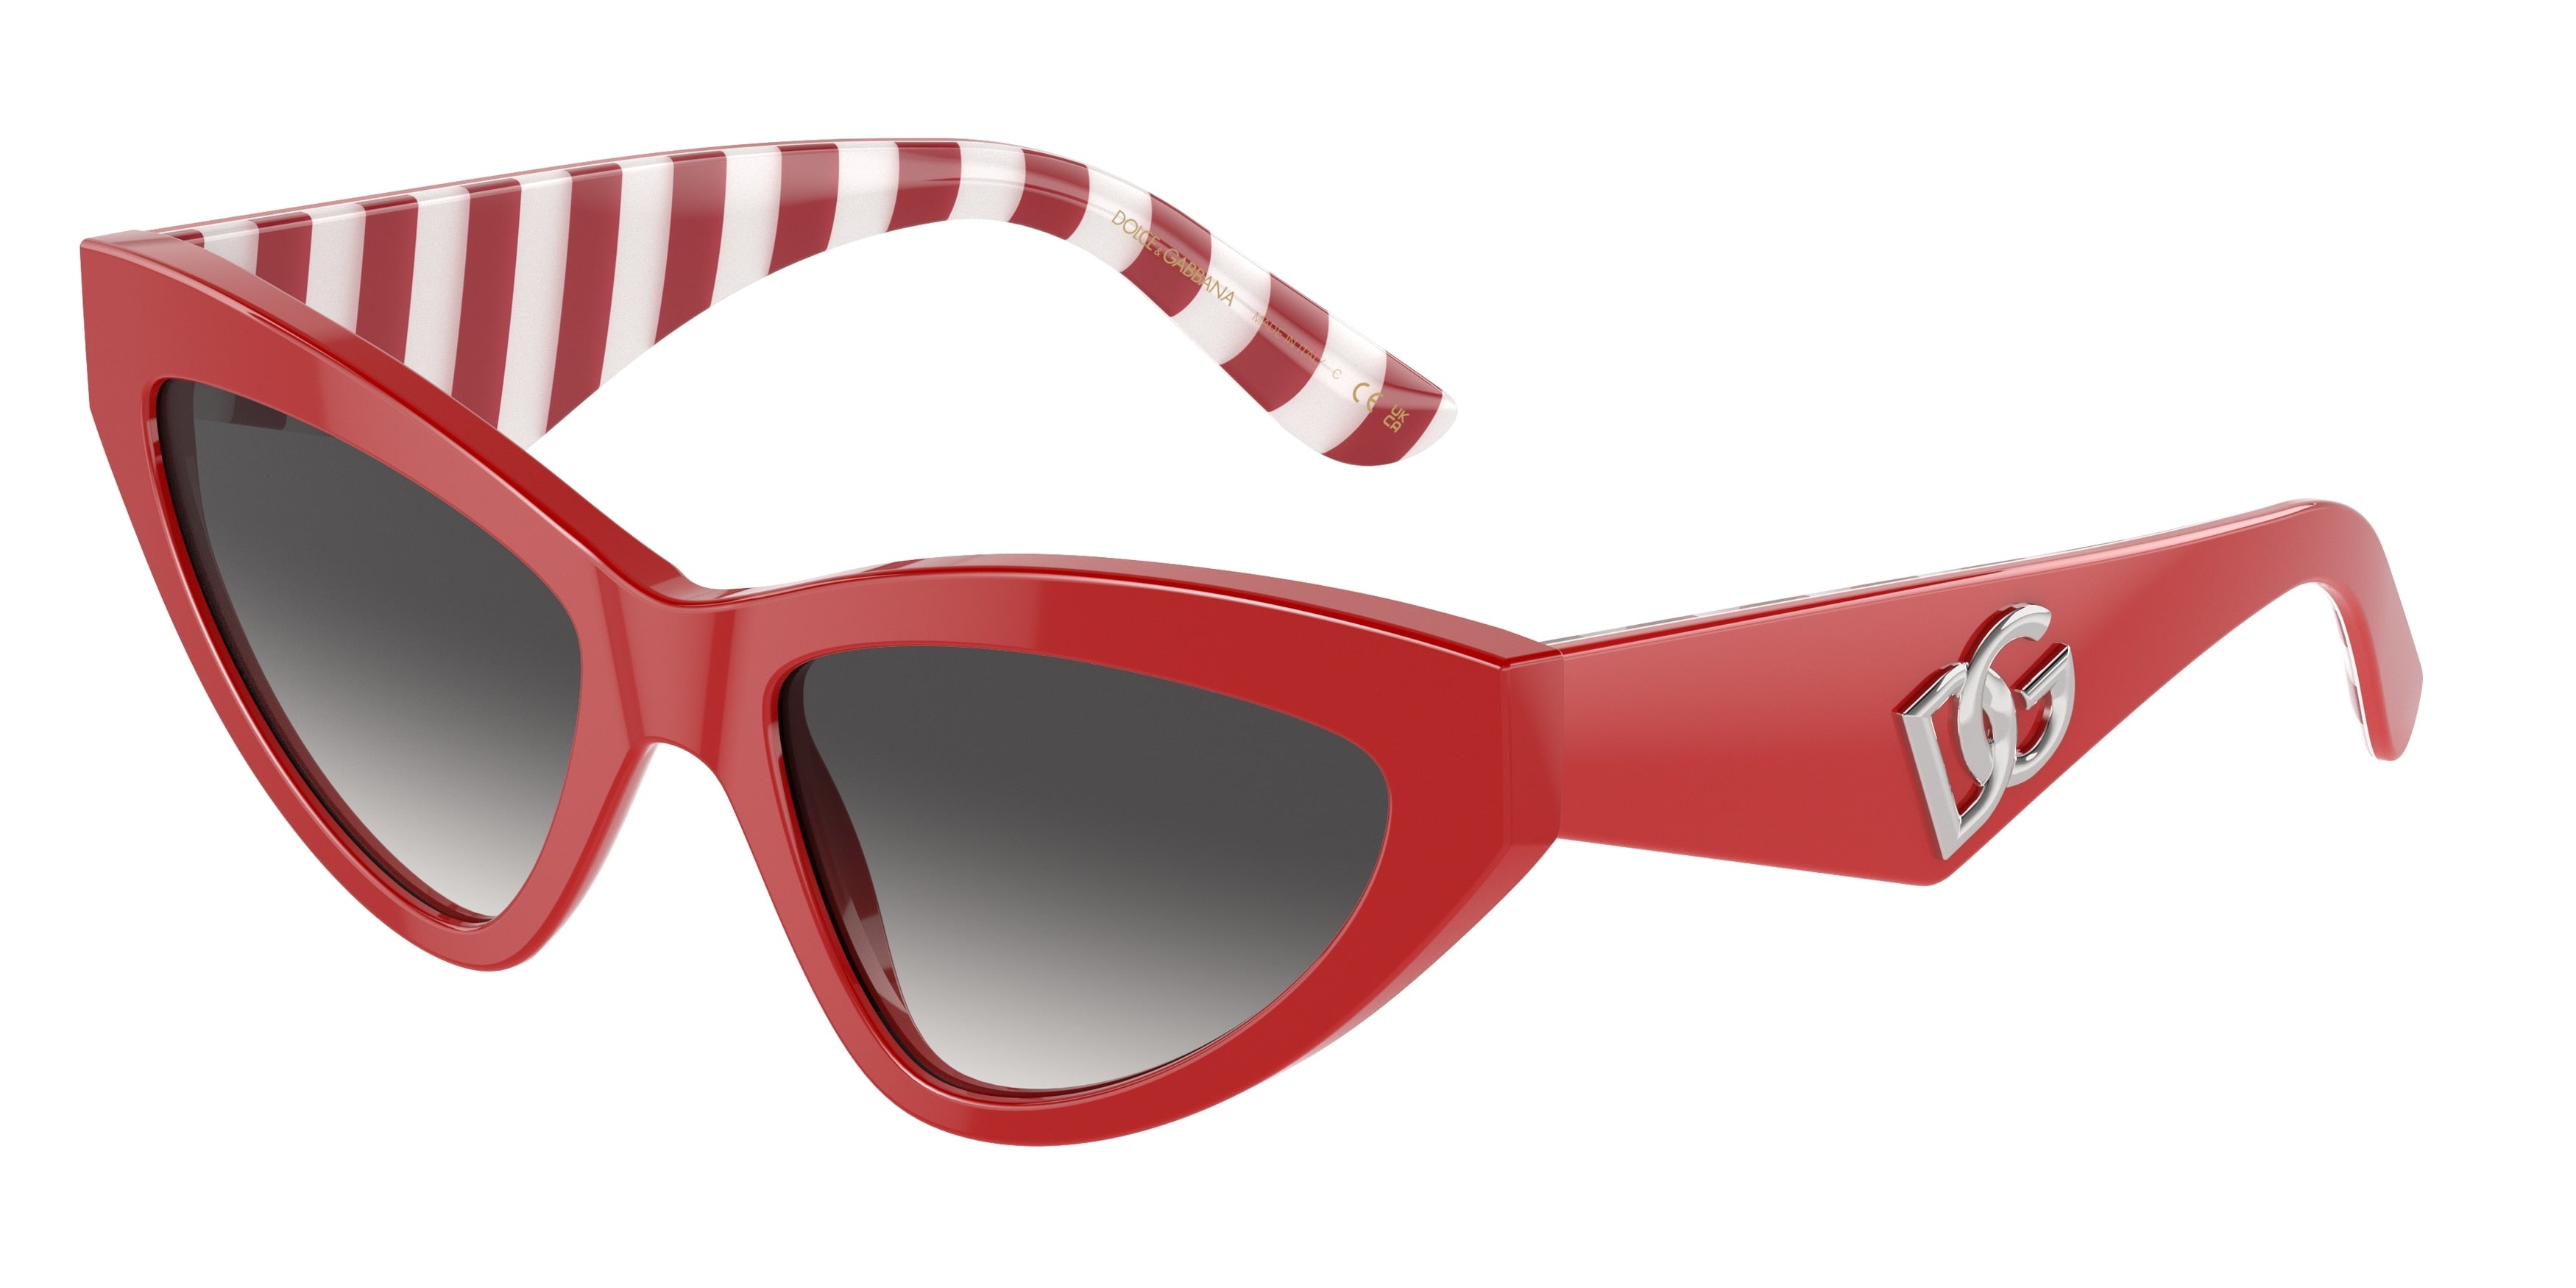 DOLCE & GABBANA DG4439 Cat Eye Sunglasses  30888G-Red 55-145-18 - Color Map Red